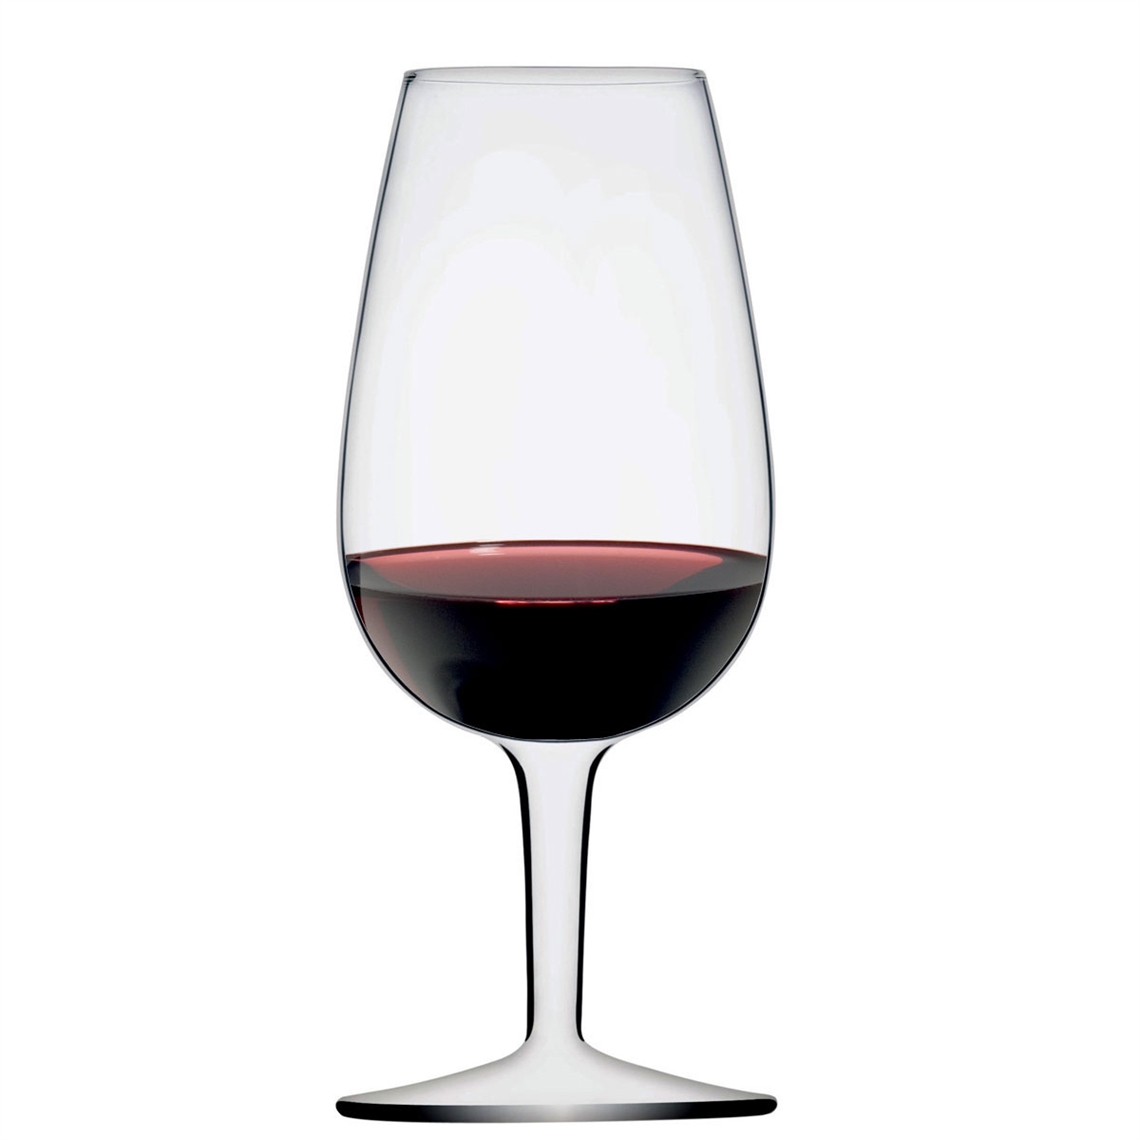 View more beer glasses from our Wine Tasting Glasses range